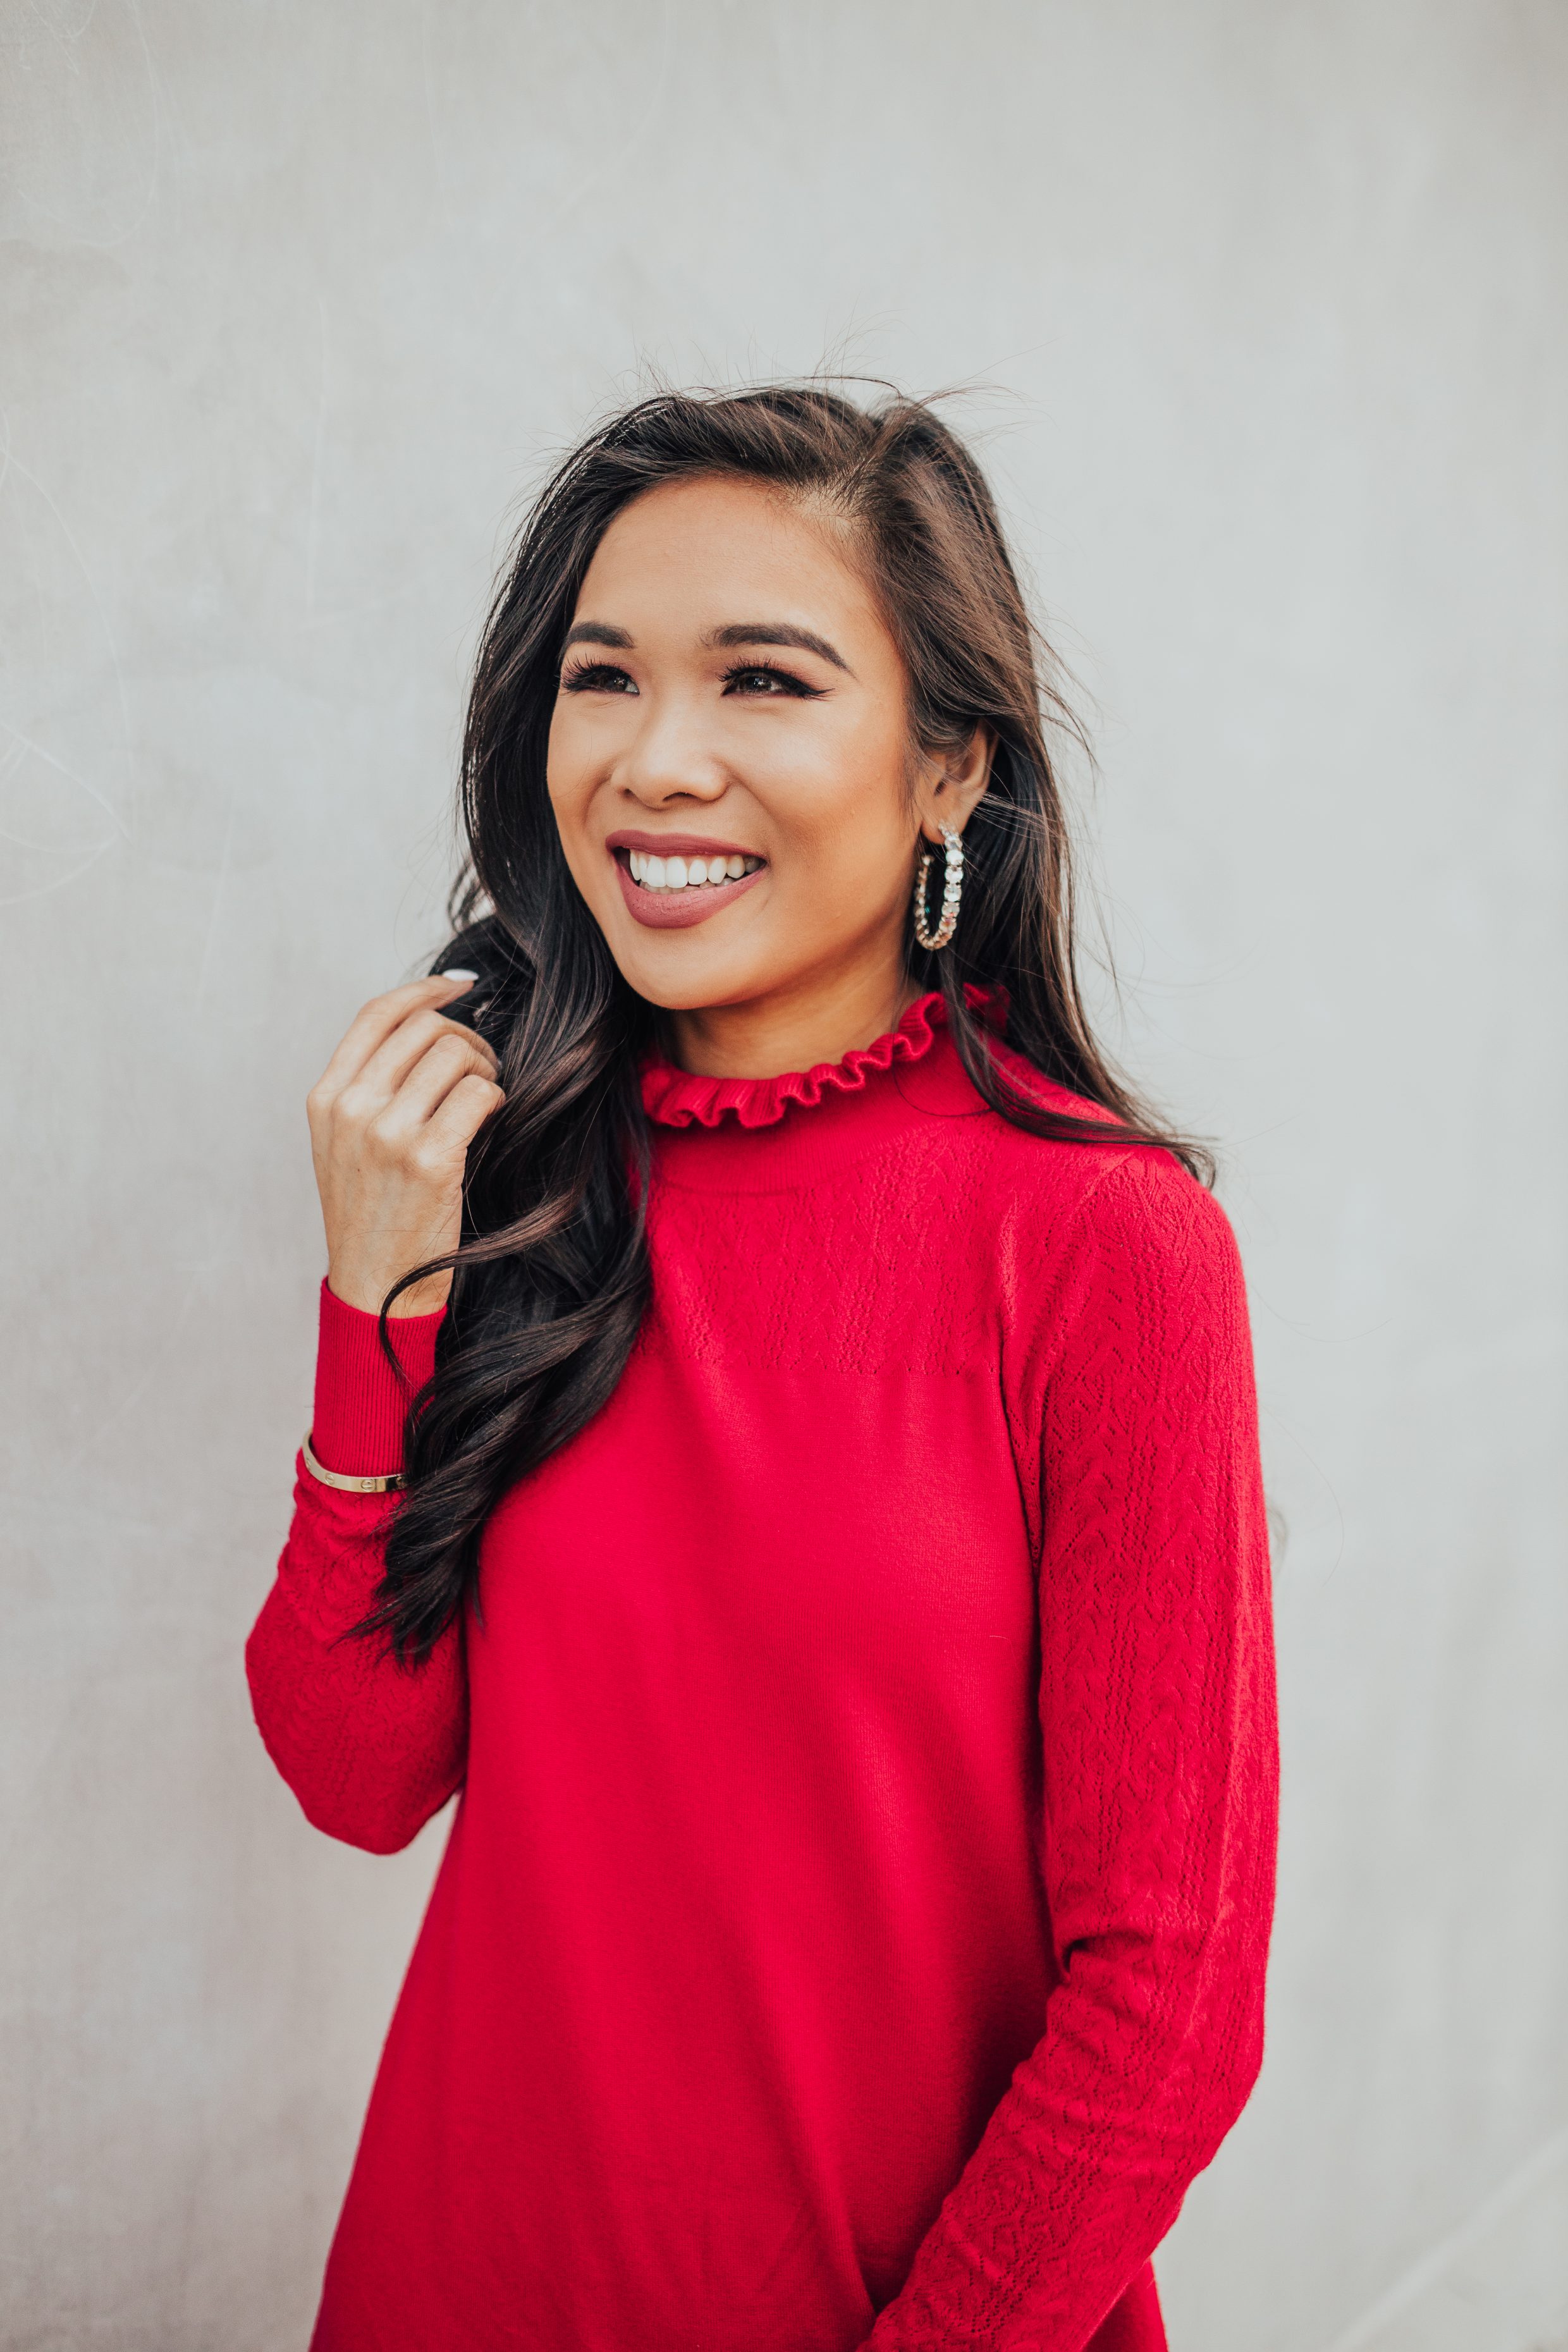 Holiday outfit ideas with a Red sweater dress with Kendra Scott Jolie Hoop Earrings